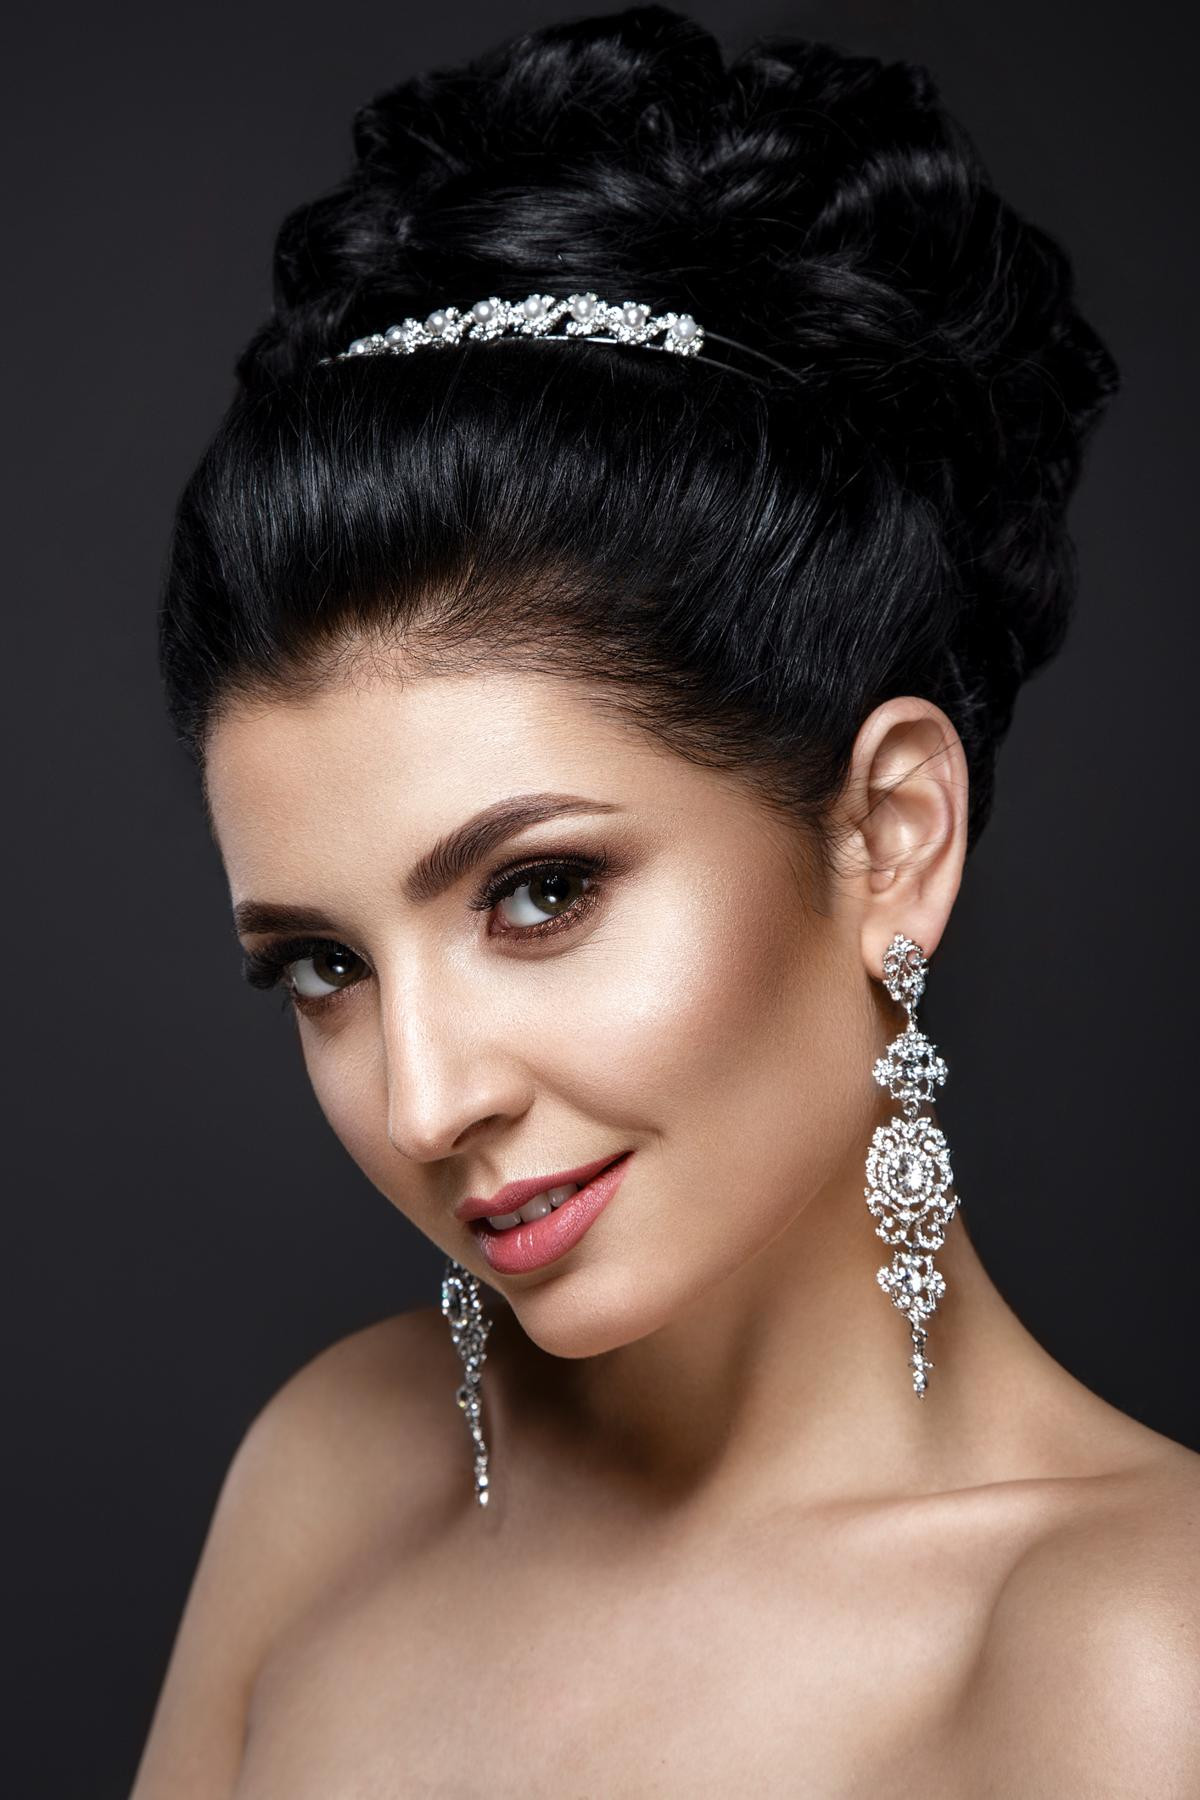 Old Hollywood Wedding Hairstyles
 You Can Recreate These Old Hollywood Hairstyles Easily at Home